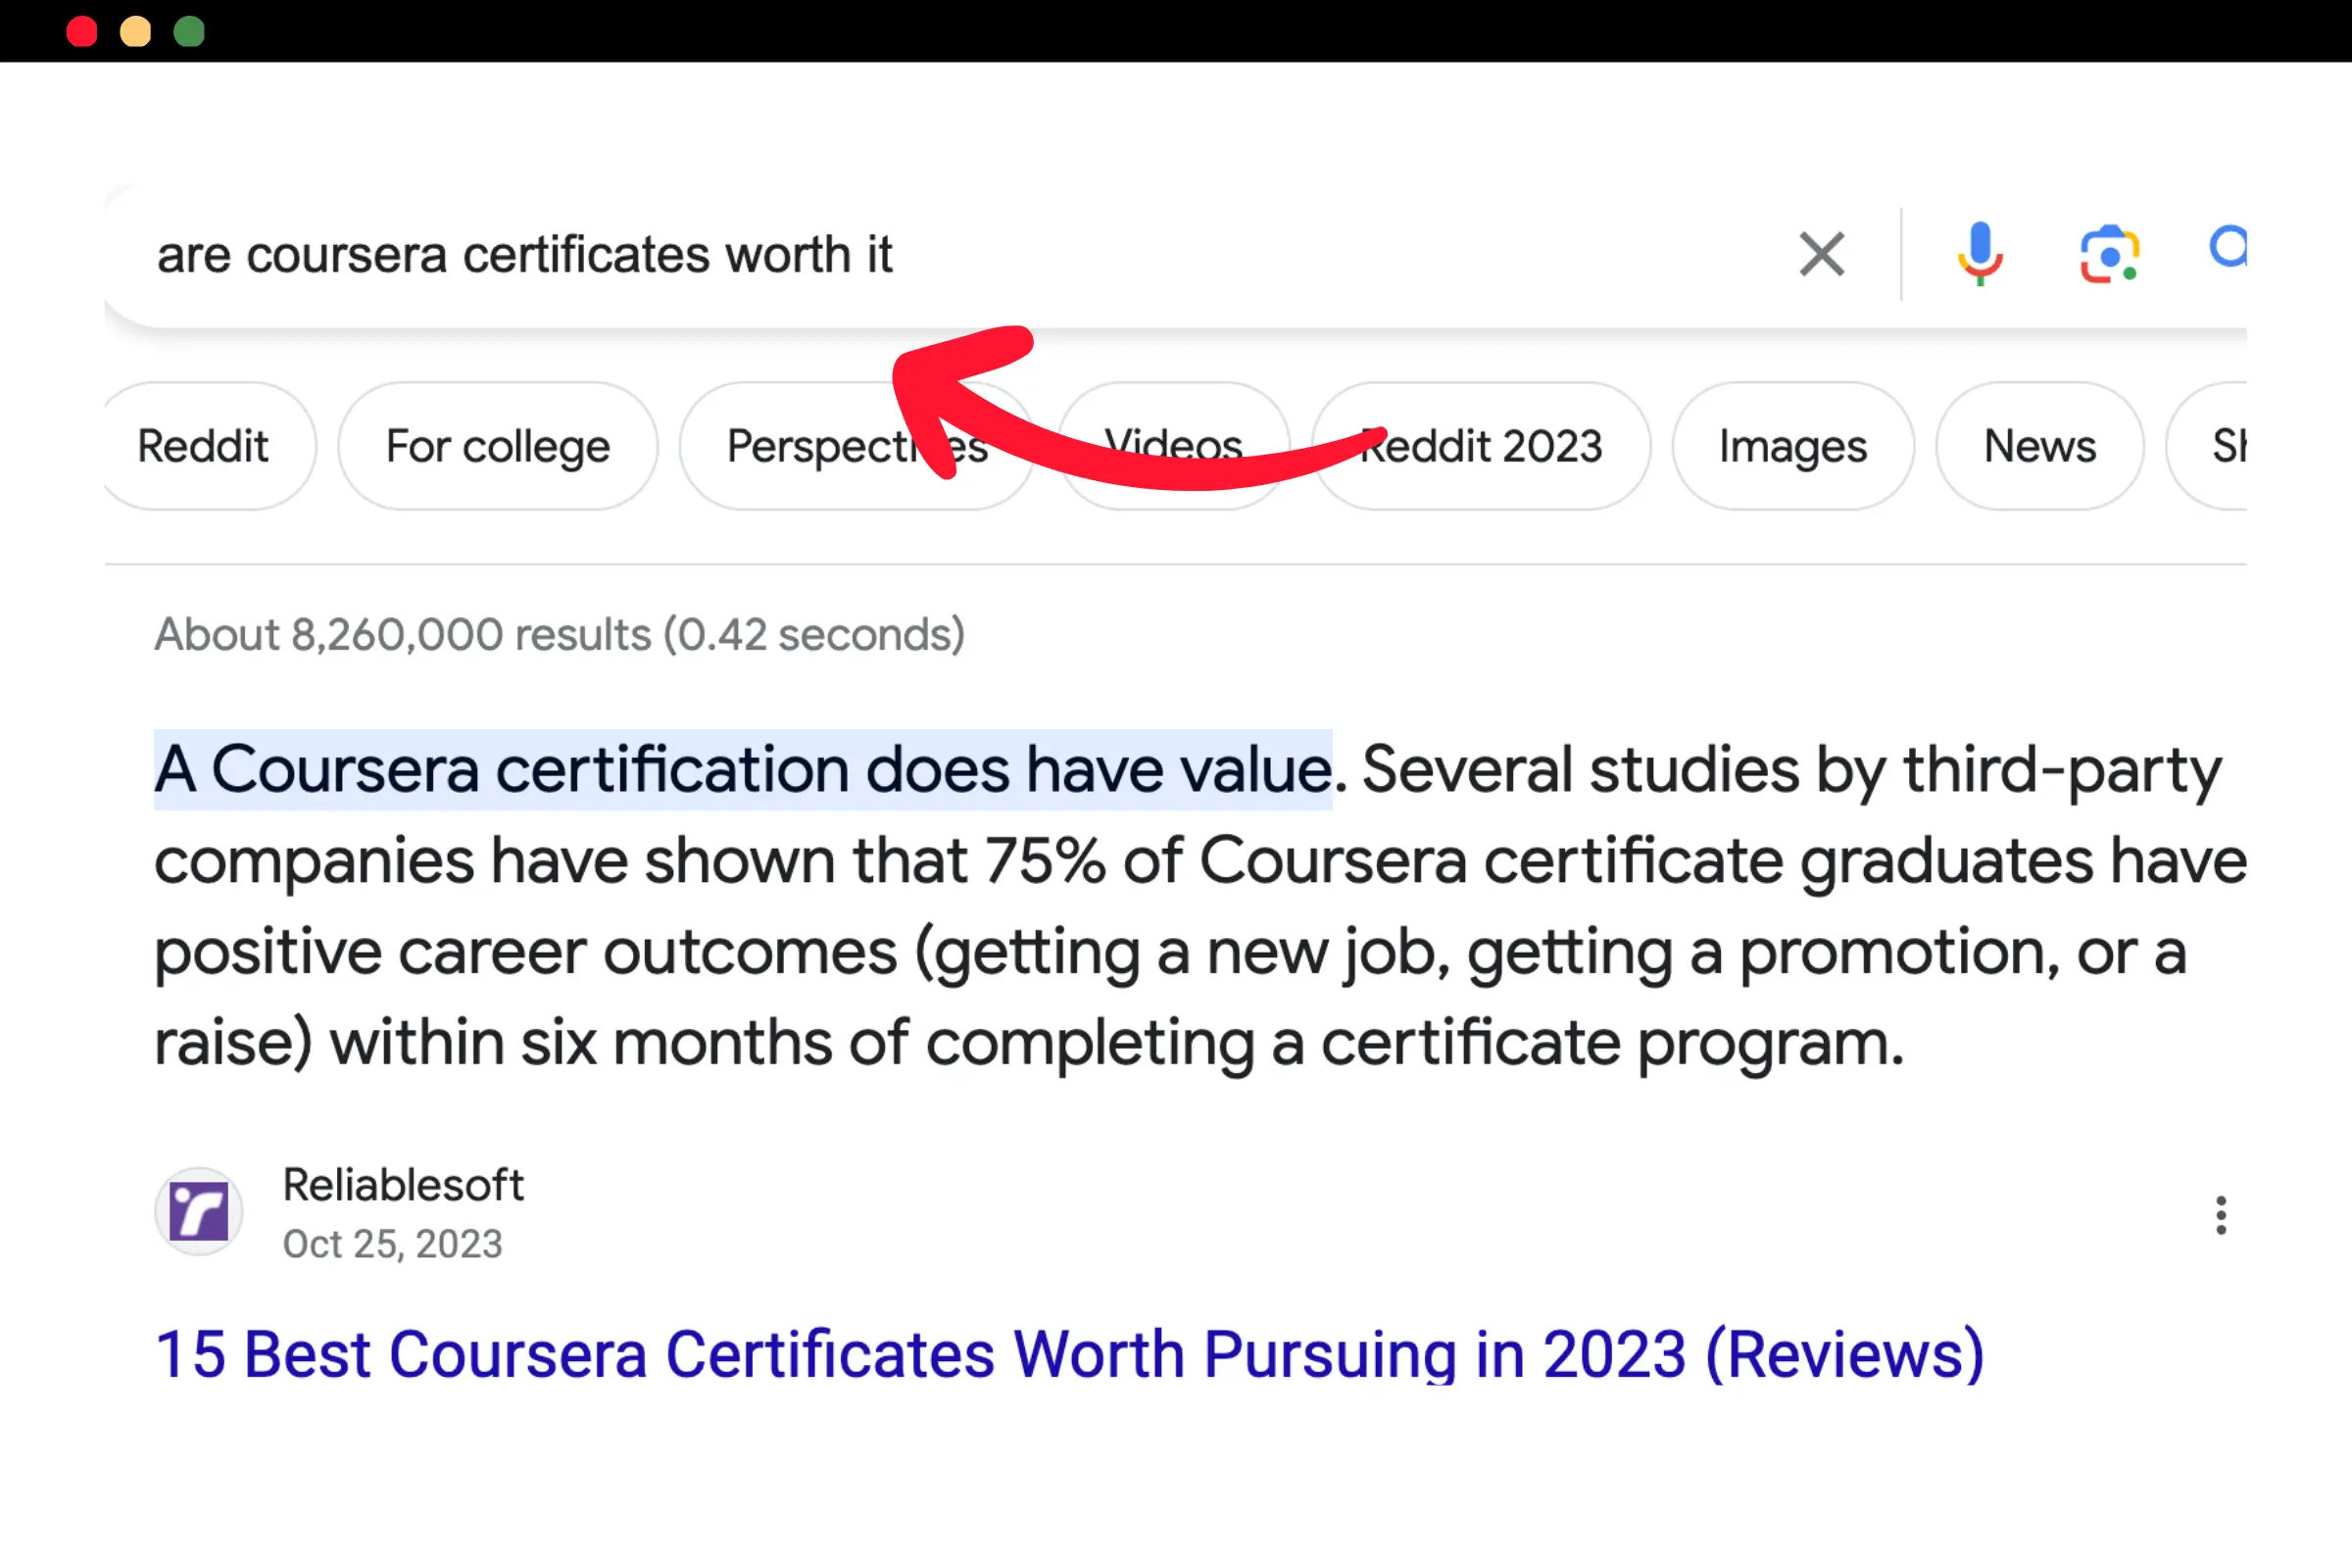 Featured Snippets - Paragraph